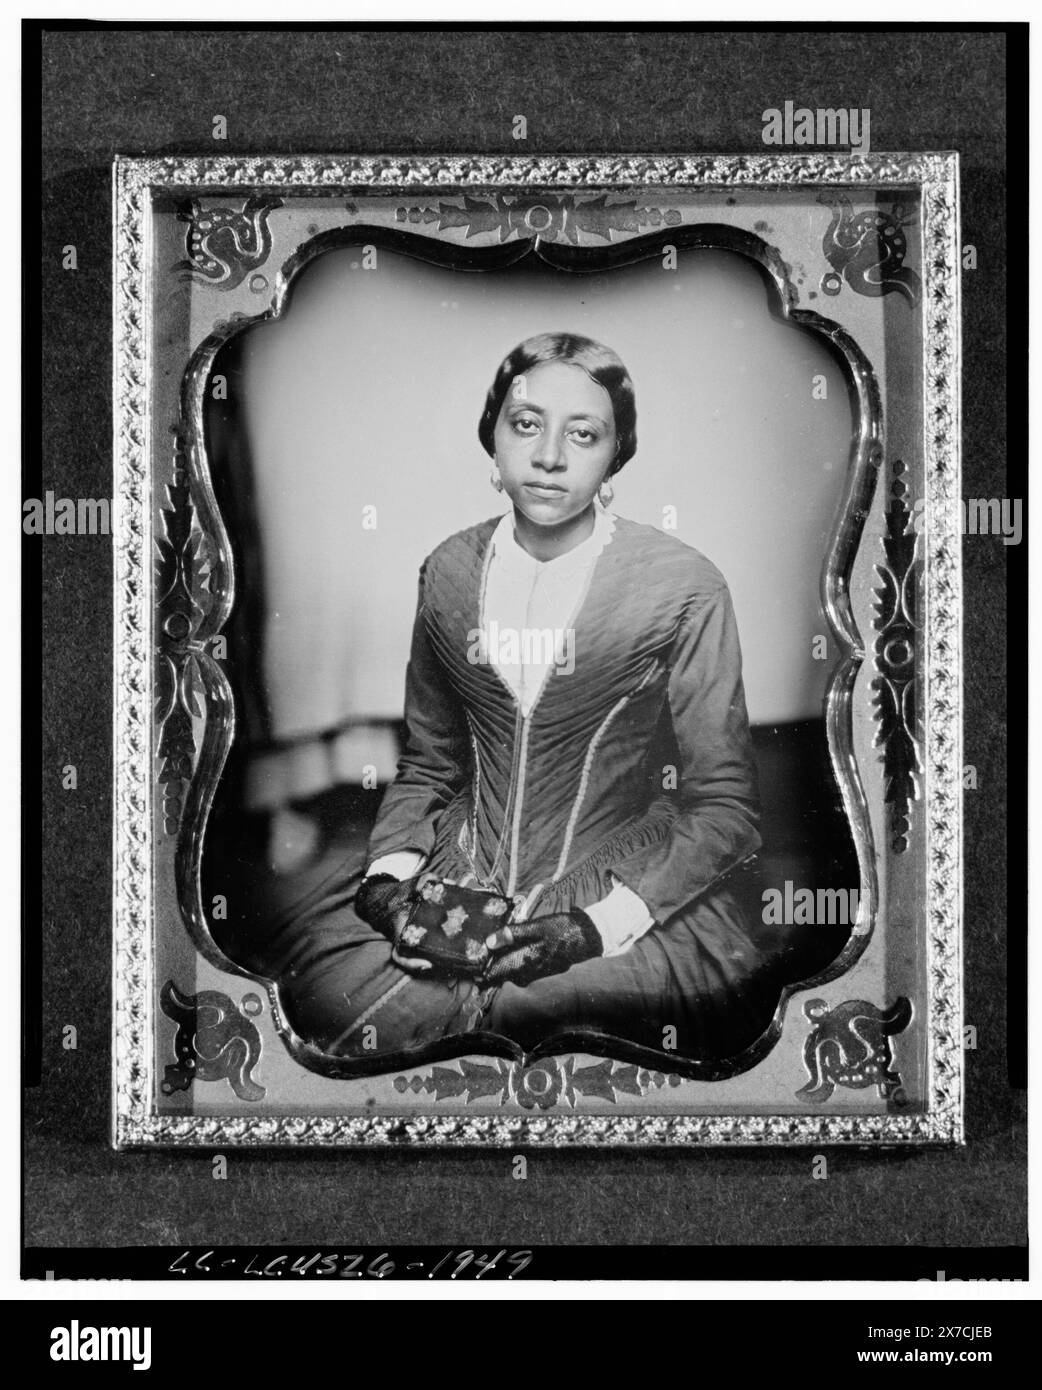 Woman, probably Sarah McGill Russwurm, sister of Urias Africanus McGill, three-quarter length portrait, facing front, holding daguerreotype case, Identification in: The Struggles of John Brown Russwurm / Winston James. New York : New York University Press, 2010, p. 81., Case: double case, red velvet with brass leaves at the corners; also houses DAG no. 1028., Was part of LOT 8554., Transfer; Manuscript Division., The American Colonization Society was organized in 1817 to resettle Afro-Americans in Liberia., Forms part of: American Colonization Society Records, 1792-1964 ,  Forms part of: Dague Stock Photo